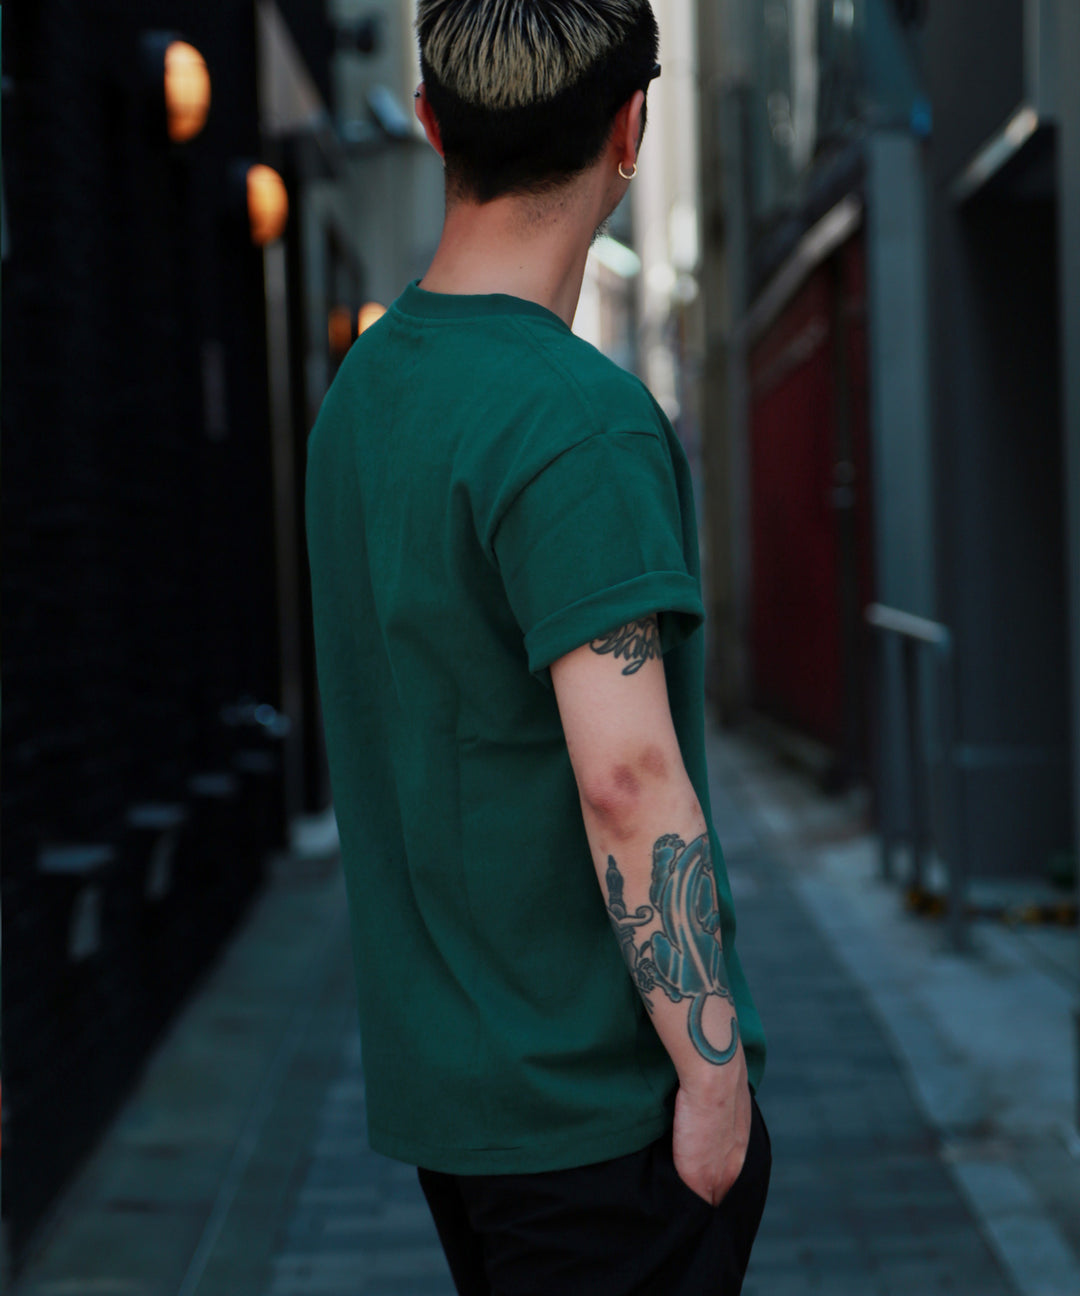 TMT×Marbles S/S T-SHIRTS(LET THERE BE TMT) / GREEN